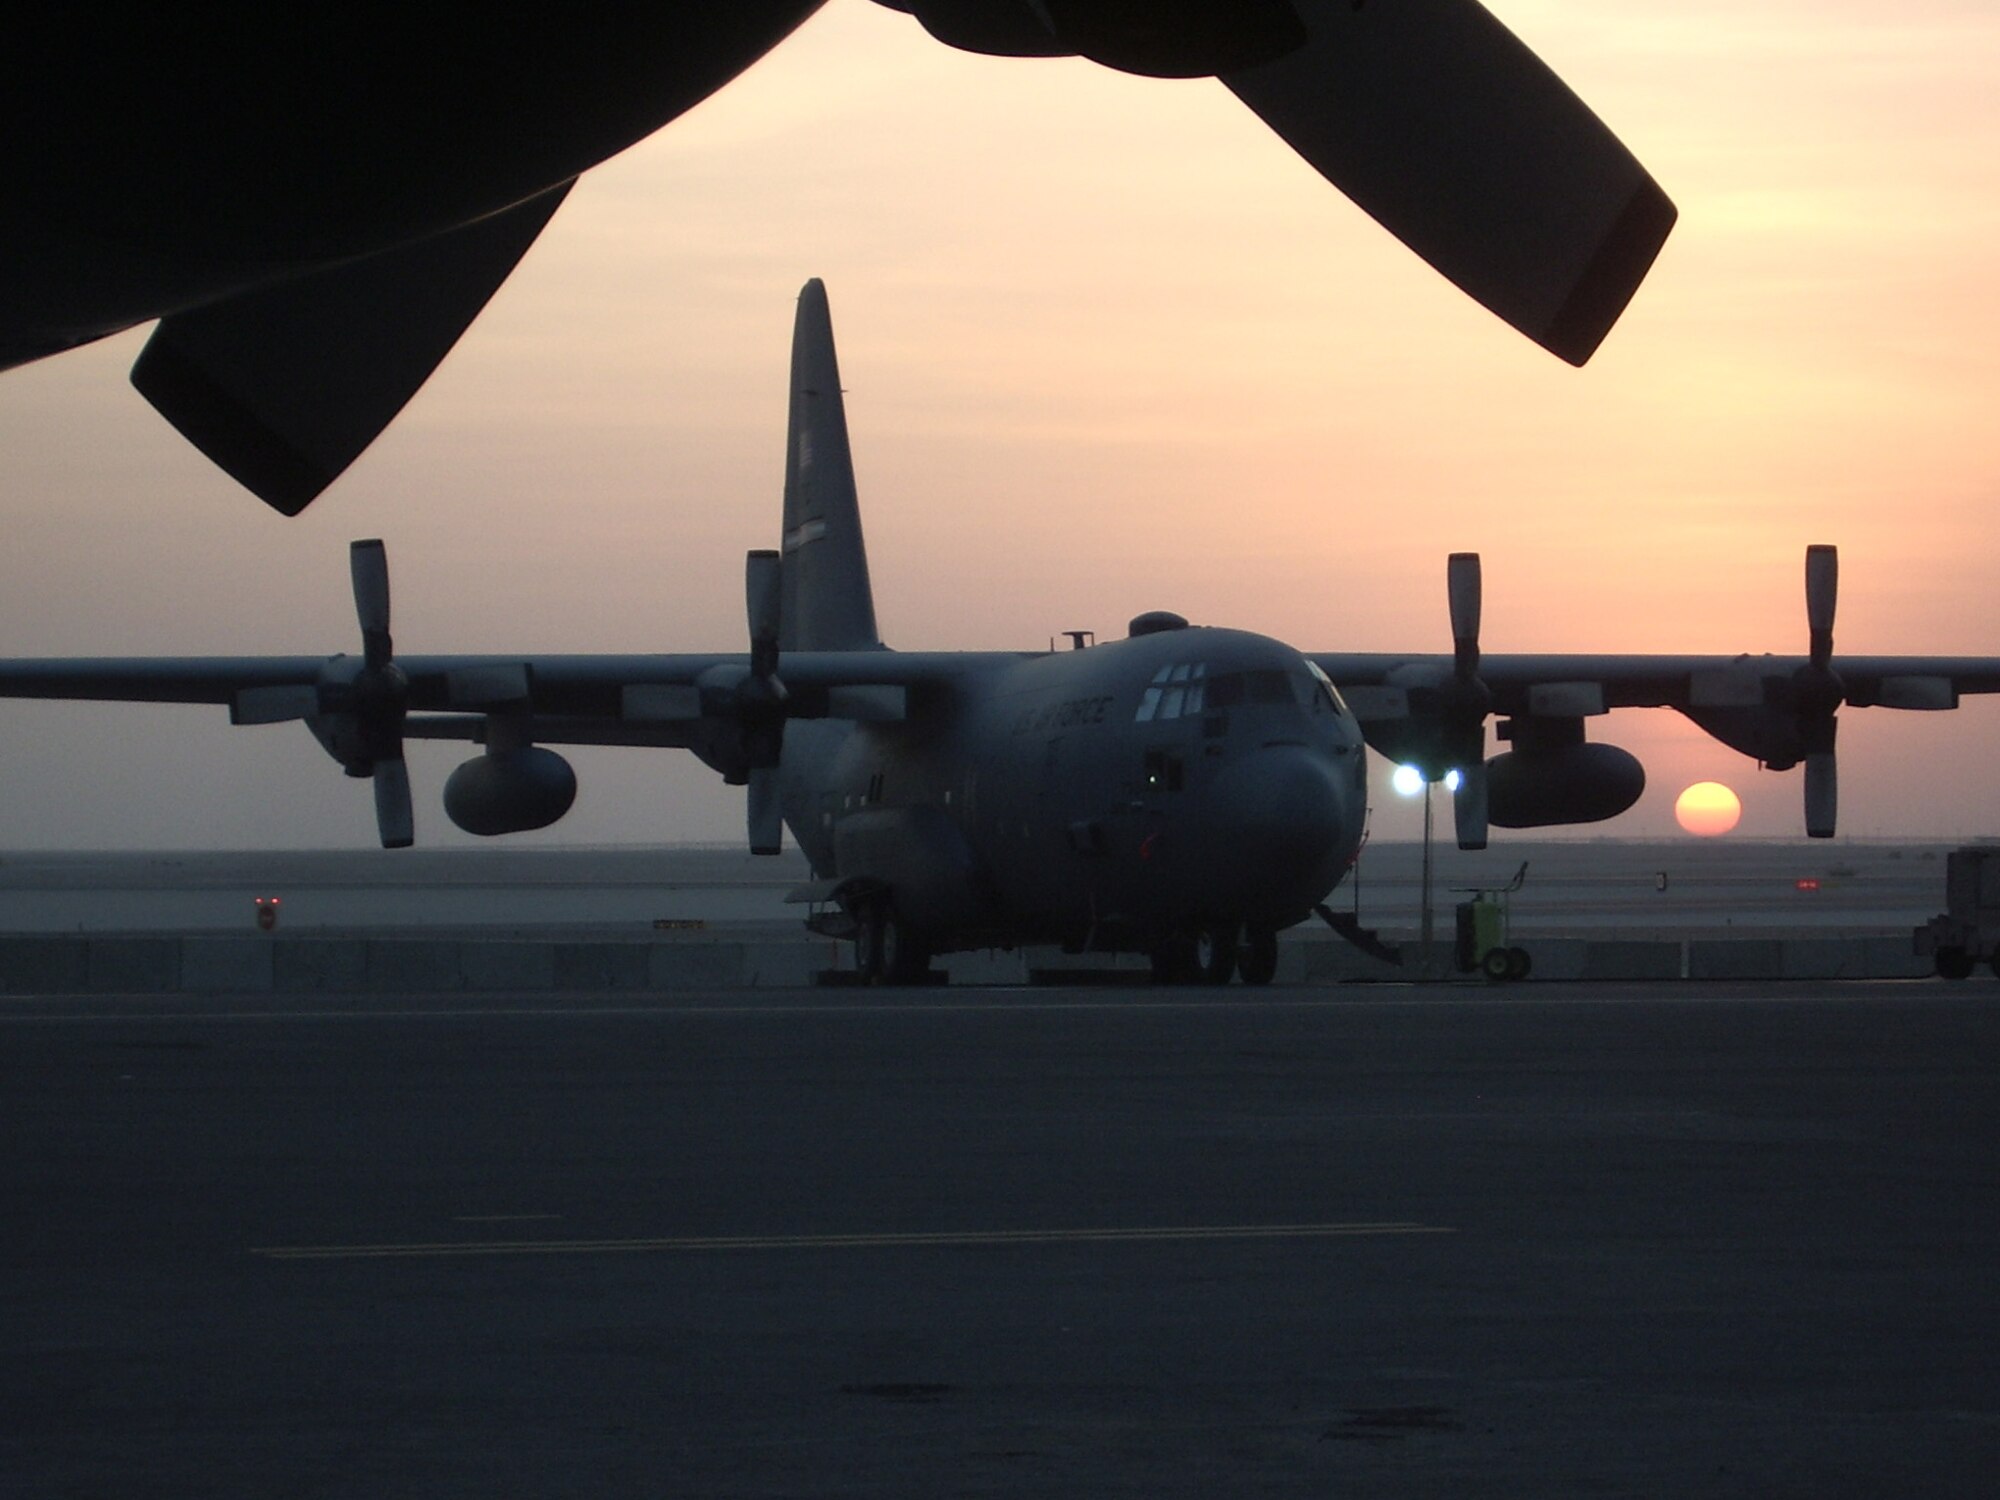 PETERSON AIR FORCE BASE, Colo. (AFRC) -- A 302nd Airlift Wing C-130 sits quietly at a deployment site in Southwest Asia. (U.S. Air Force photo by Maj. Ryan Tanton)